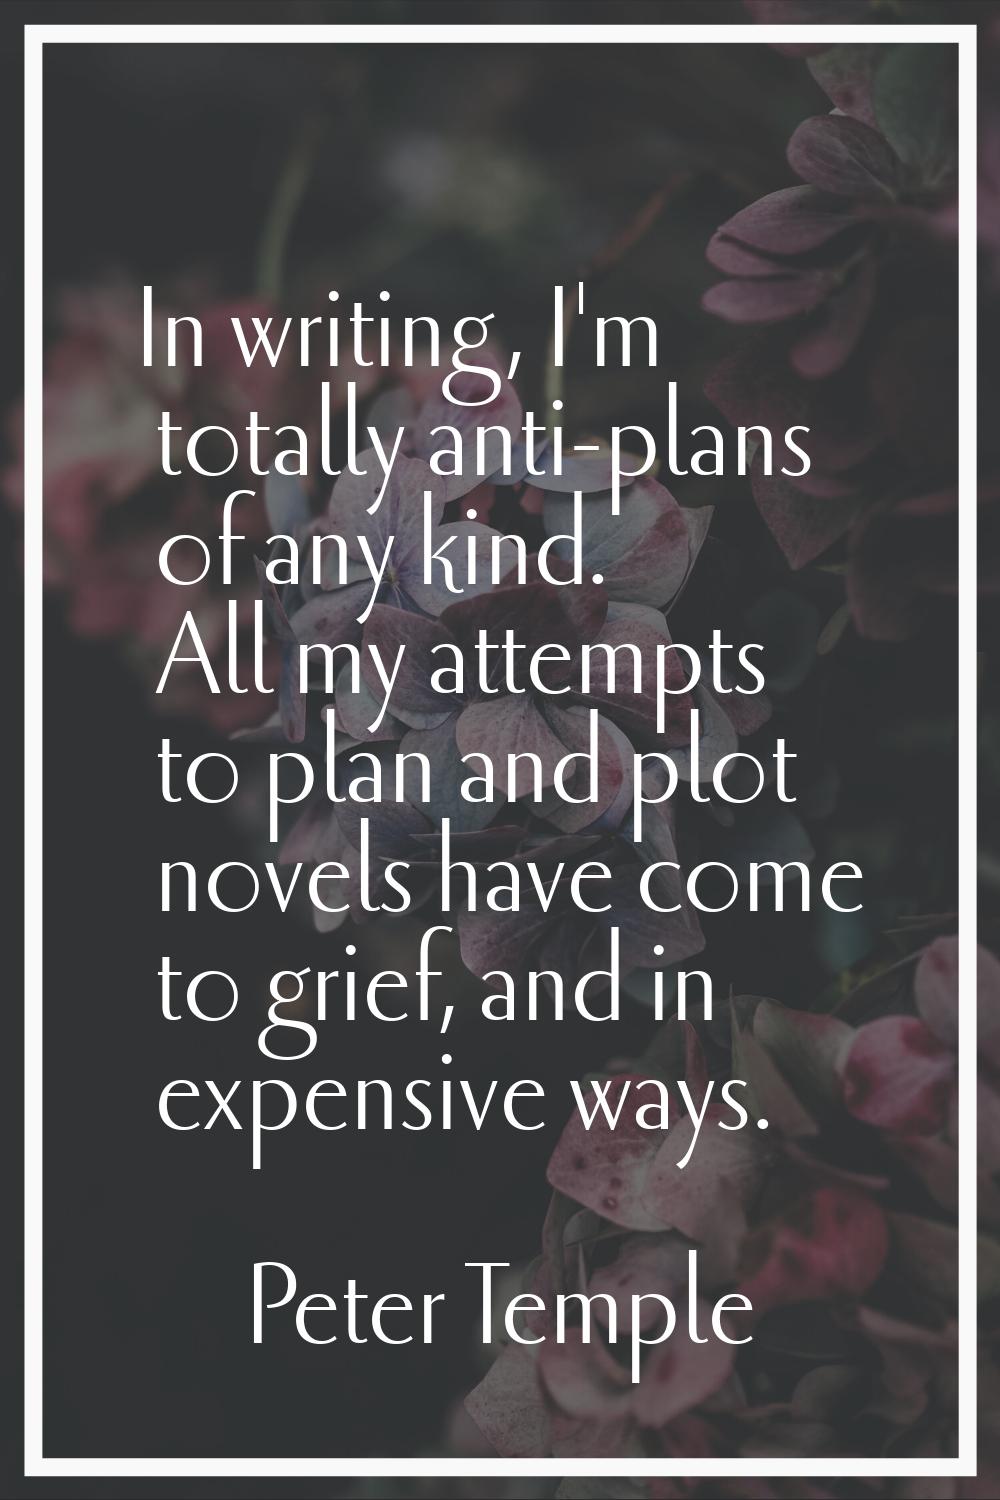 In writing, I'm totally anti-plans of any kind. All my attempts to plan and plot novels have come t